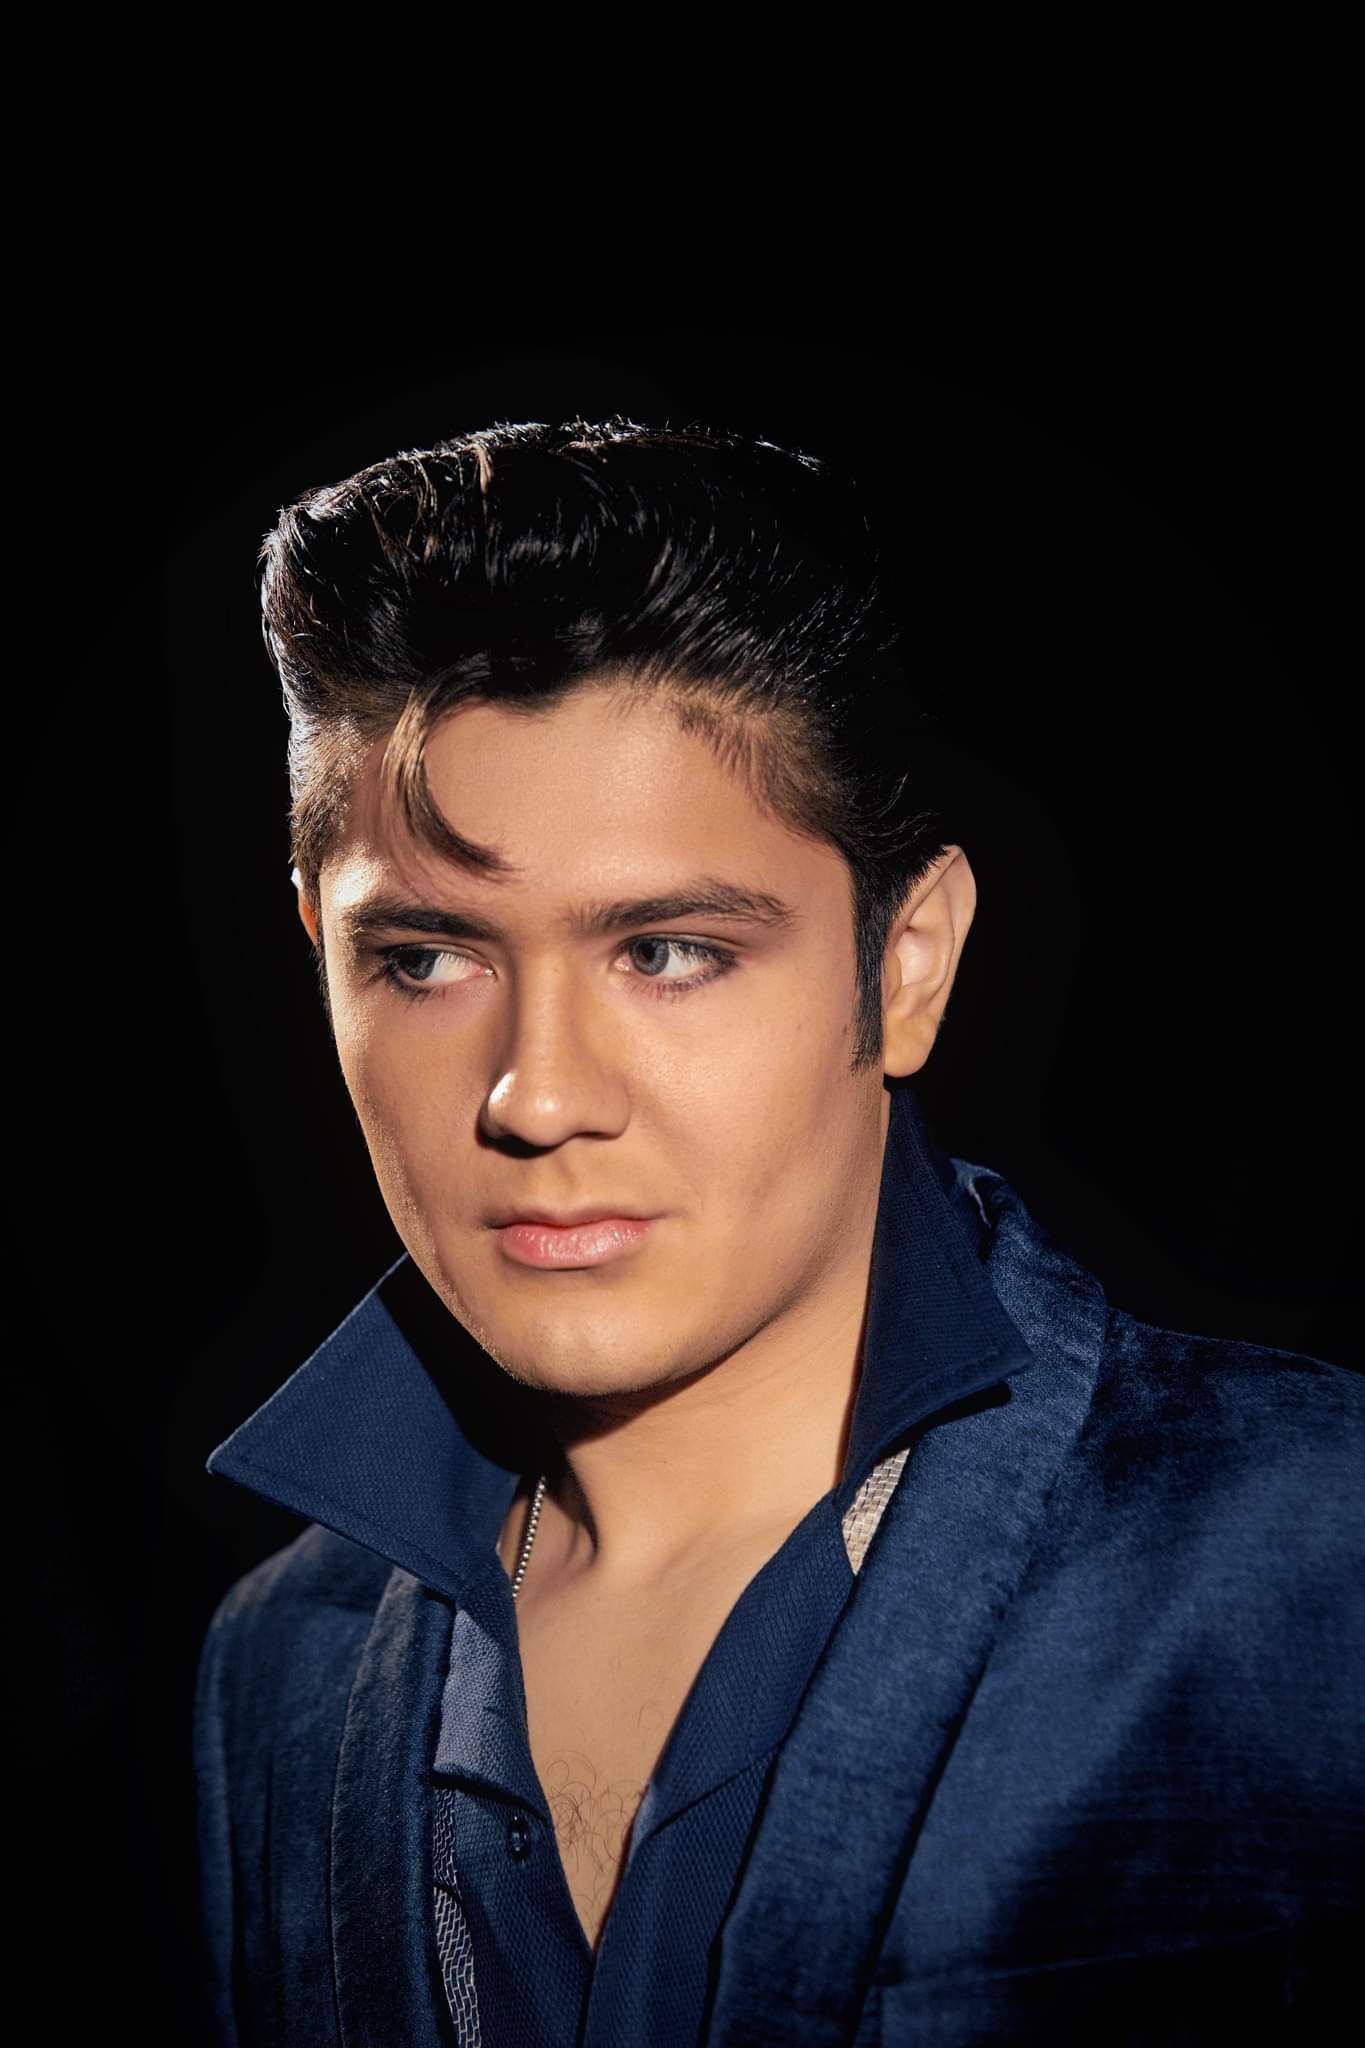 Shake Rattle & Roll: Moses Snow's tribute to Elvis